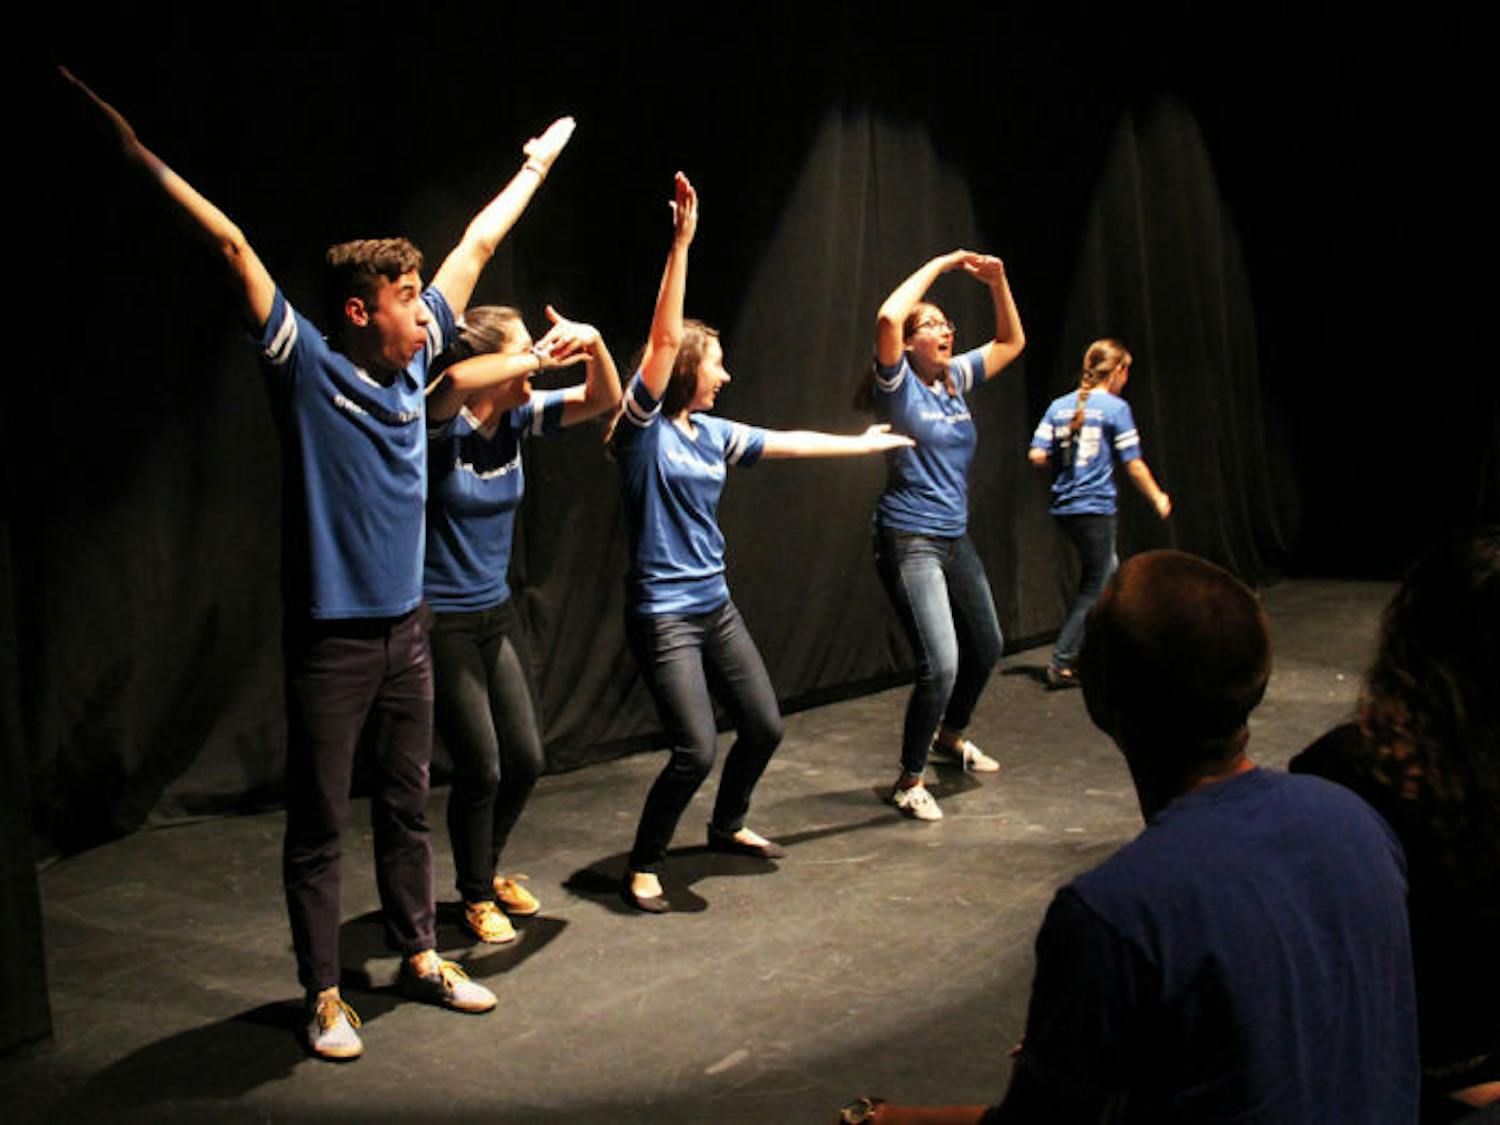 Members of UF’s Theatre Strike Force perform during the last night of the 8th Annual Gainesville Improv Festival at Squitieri Studio Theatre on Saturday.